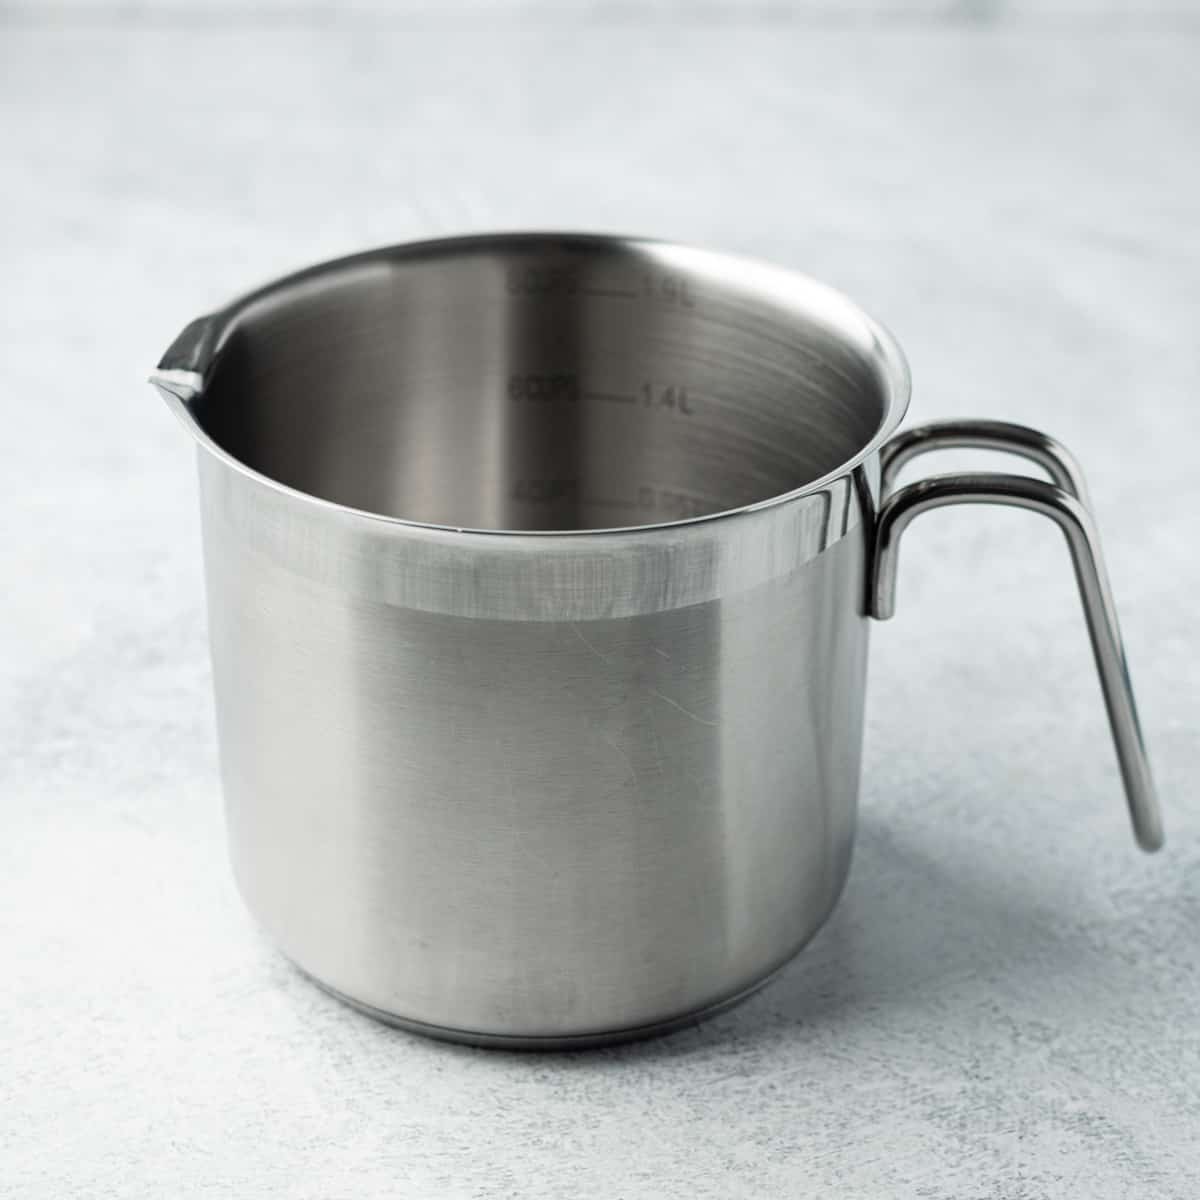 Small stainless-steel pot with a curved handle that contains interior measurements in cups and liter units.